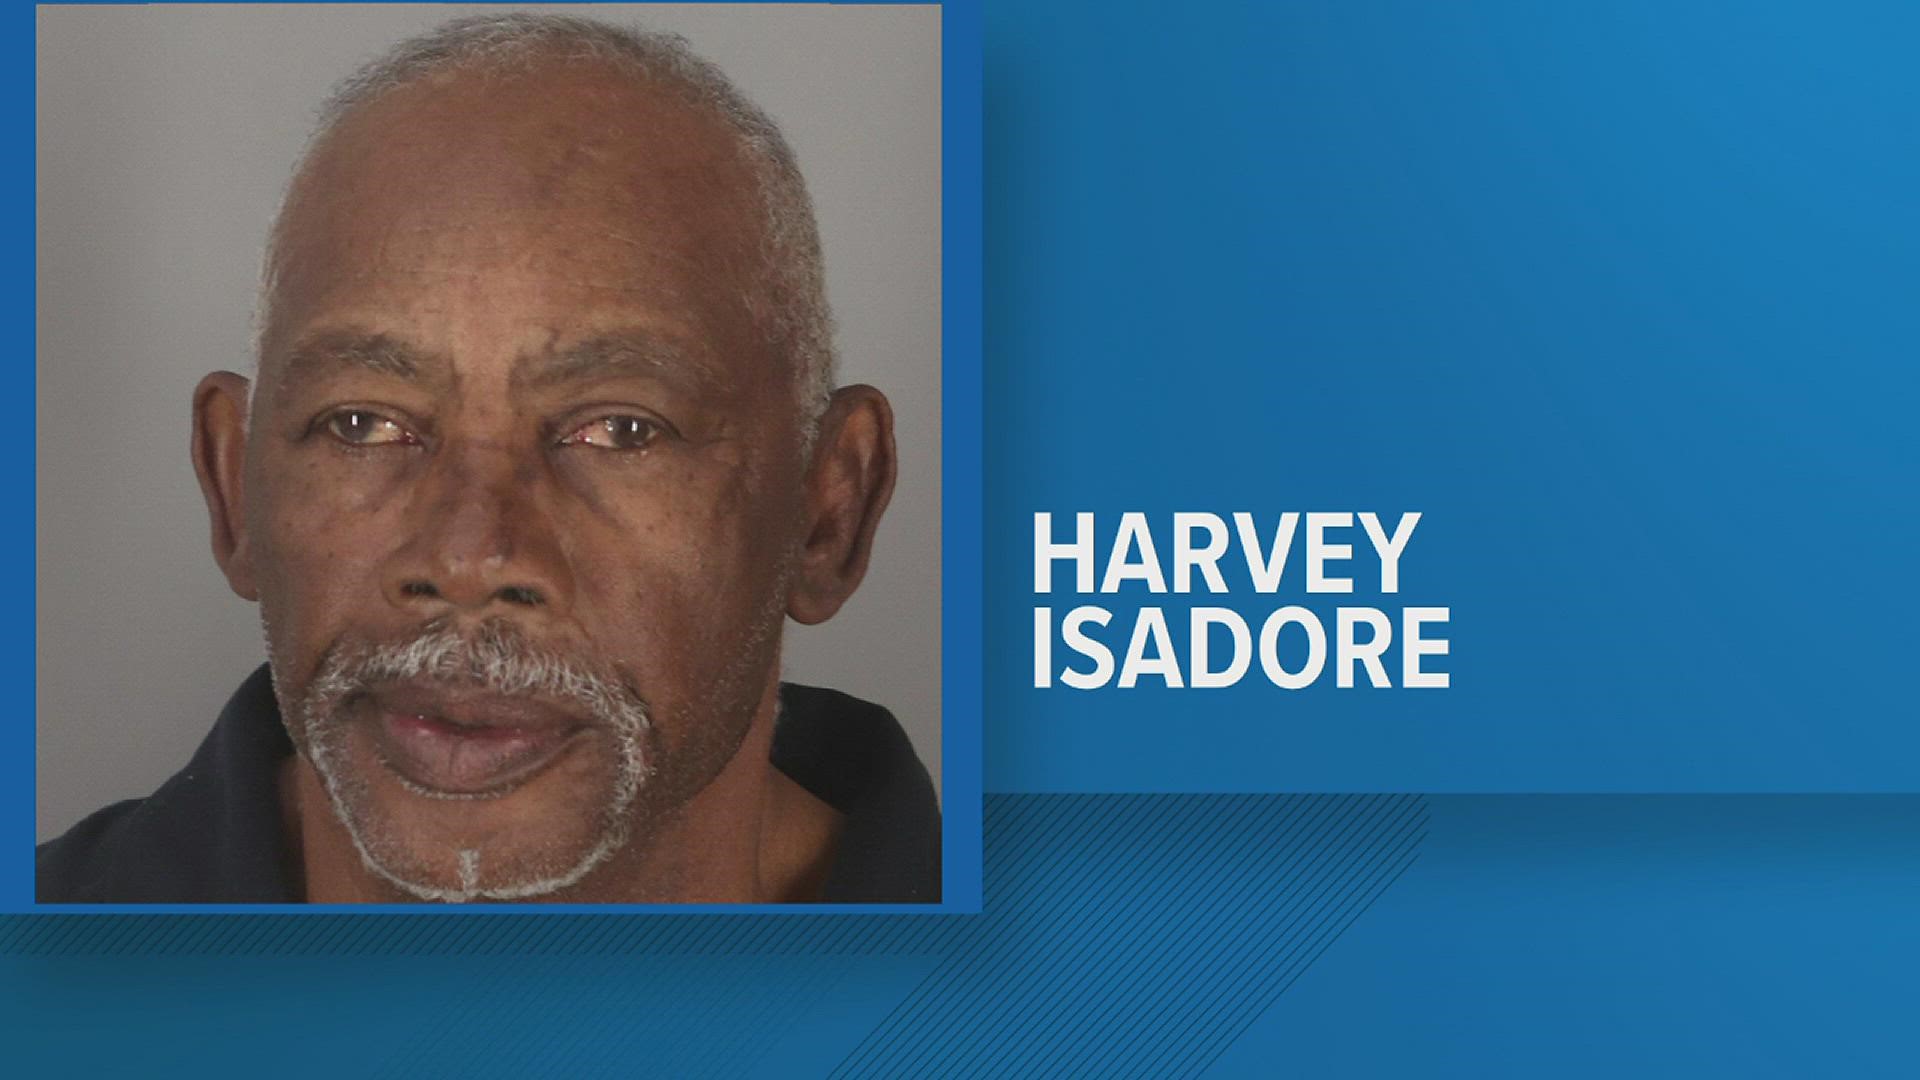 The jury deliberated for less than 2 hours before deciding a 28-year sentence, with no possibility of parole for Isadore.